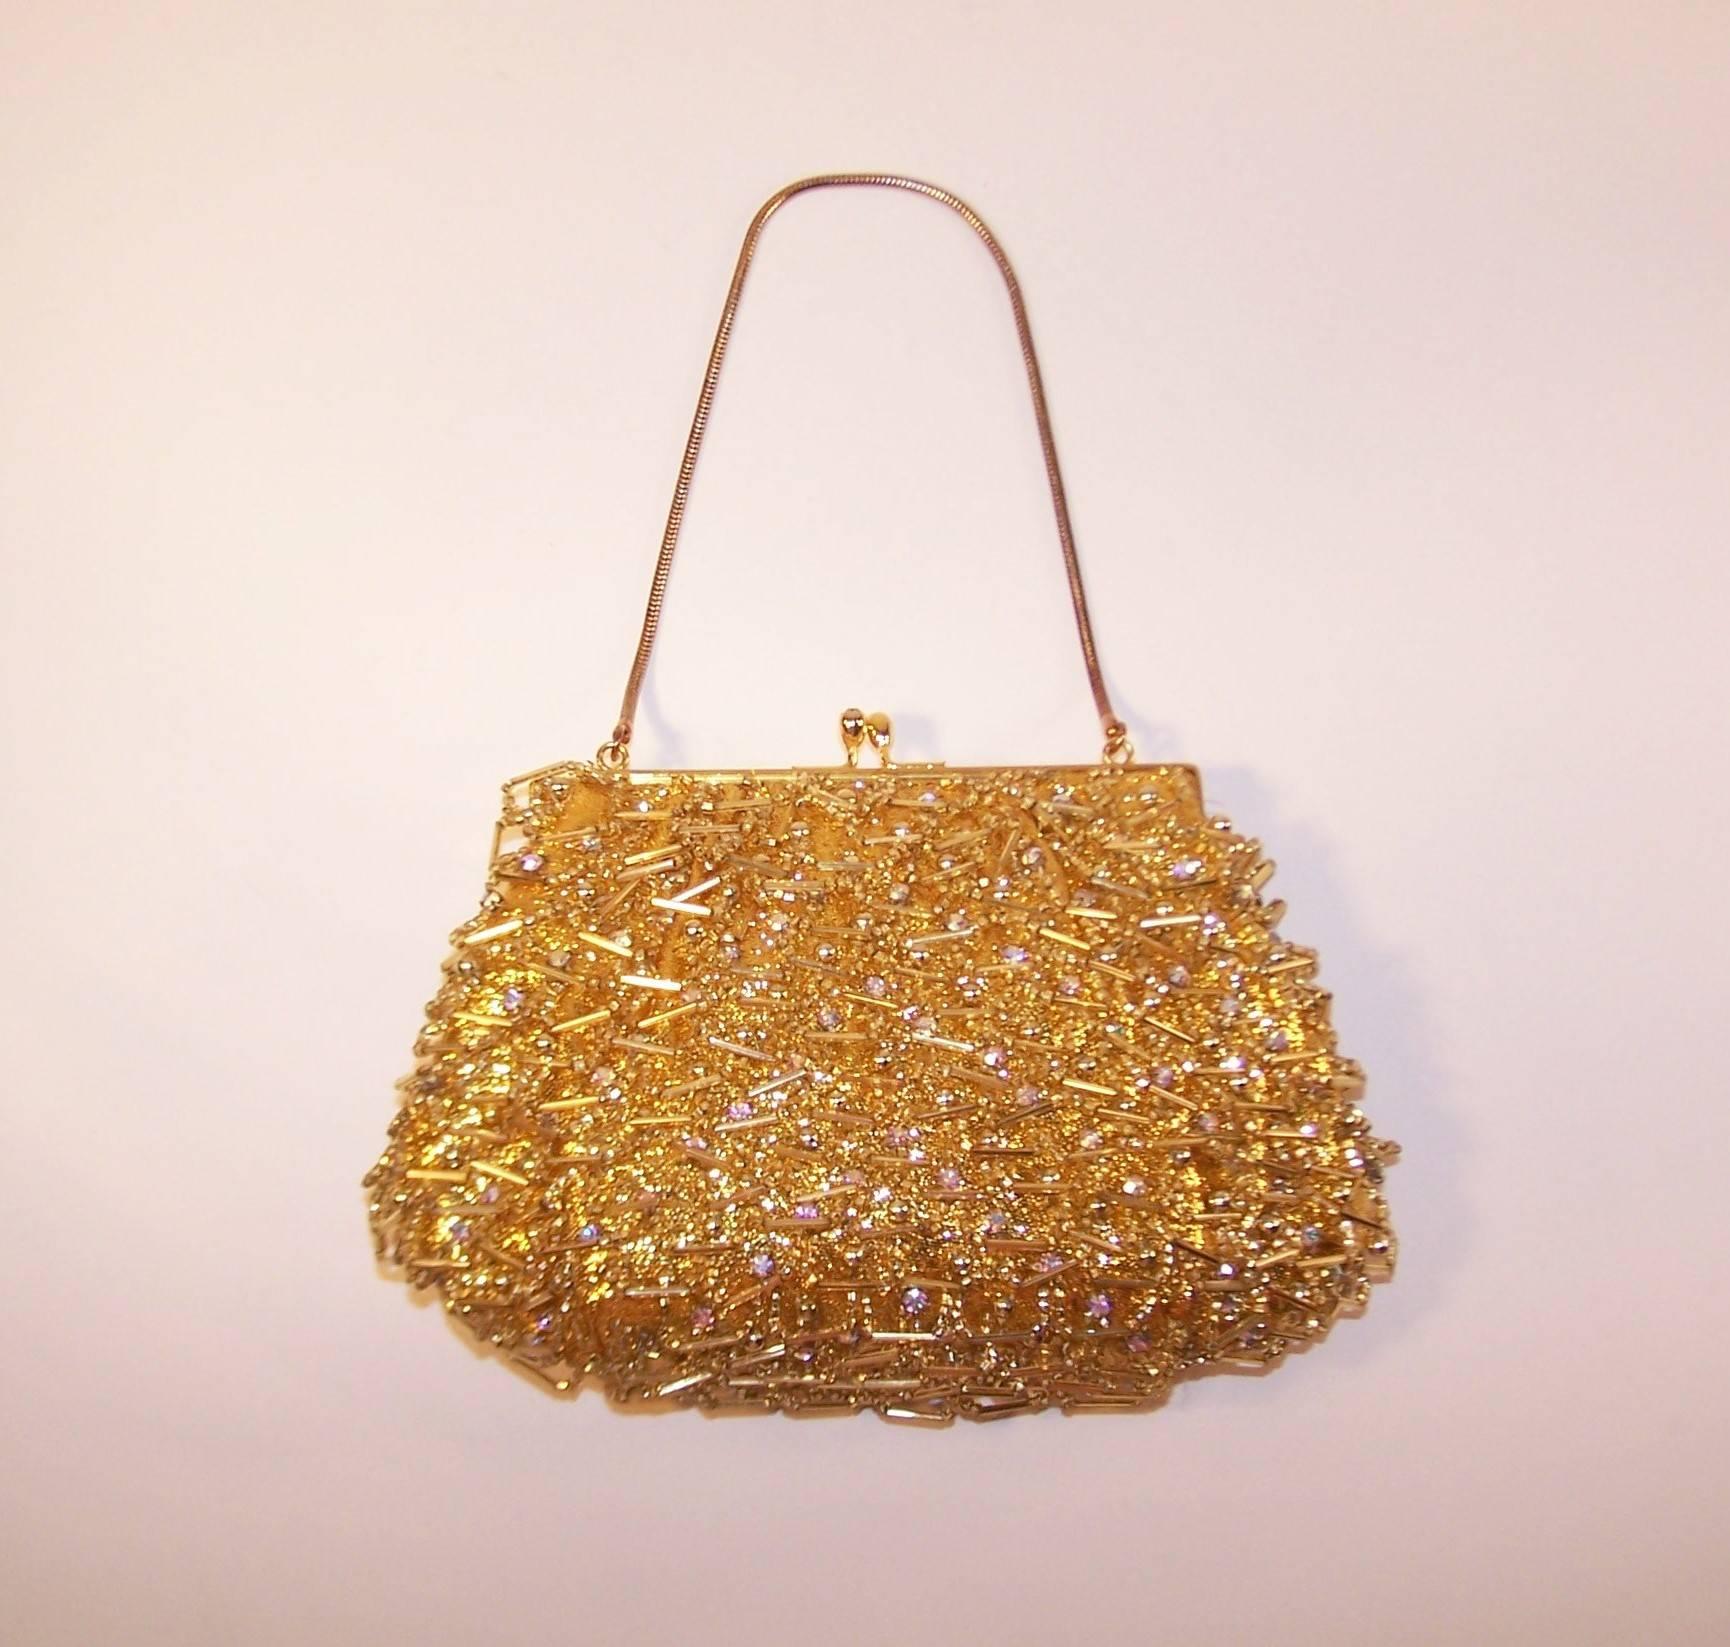 This adorable evening handbag by Magid has the golden touch.  The gold lame fabric body is embellished with looped beading, gold balls and aurora borealis style rhinestones.  The kiss lock closure opens to reveal a satin lined interior with a side